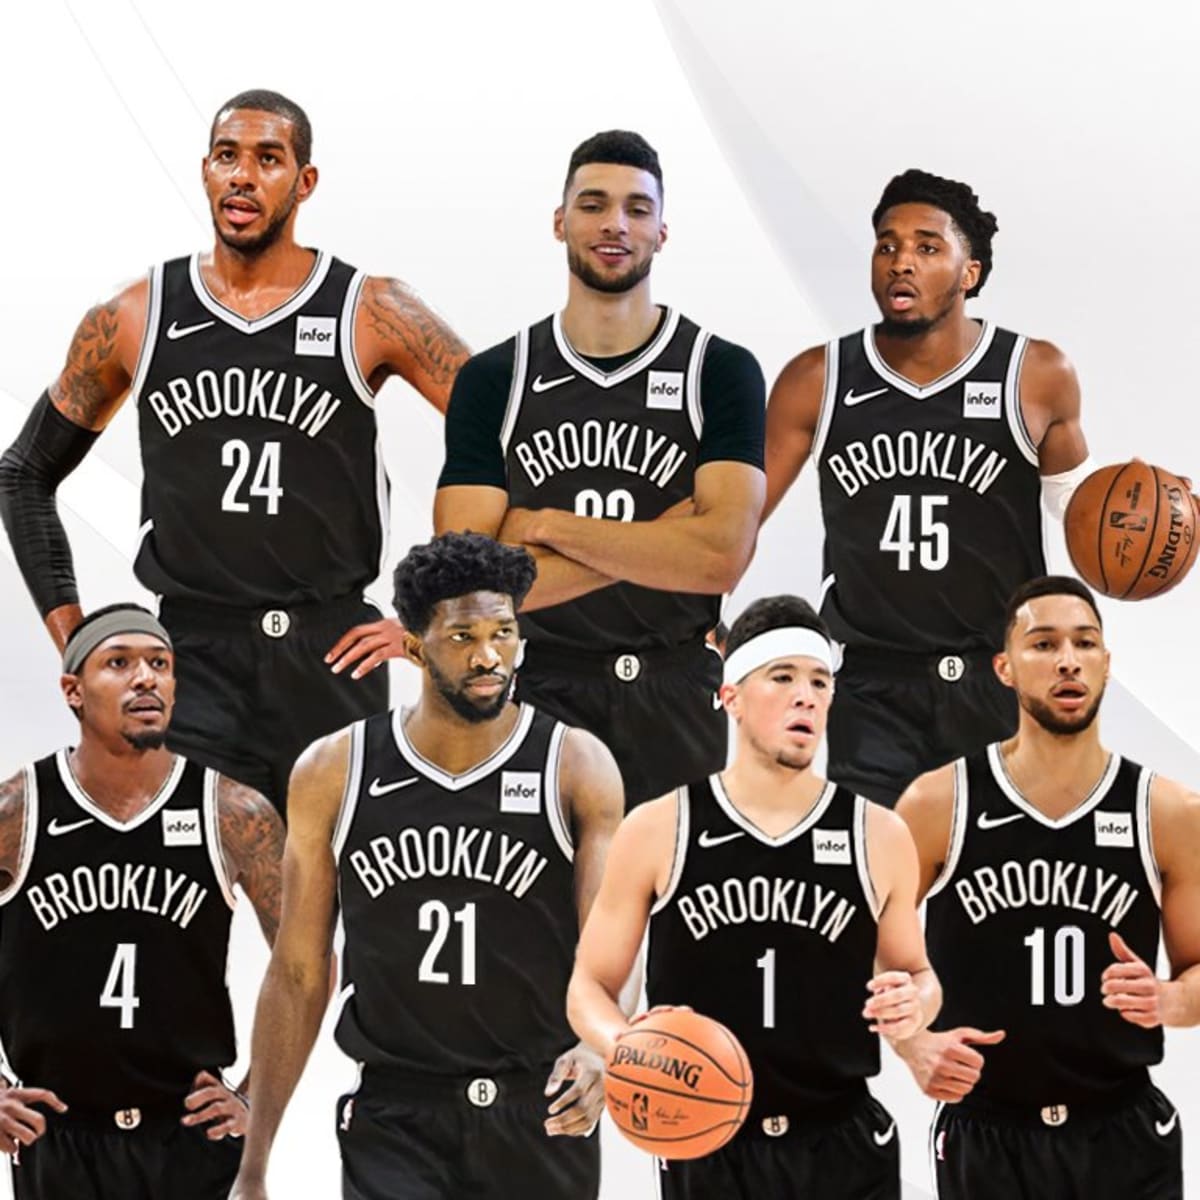 NBA Trade Rumors: Re-exploring summer trade options with the Brooklyn Nets  - The Dream Shake